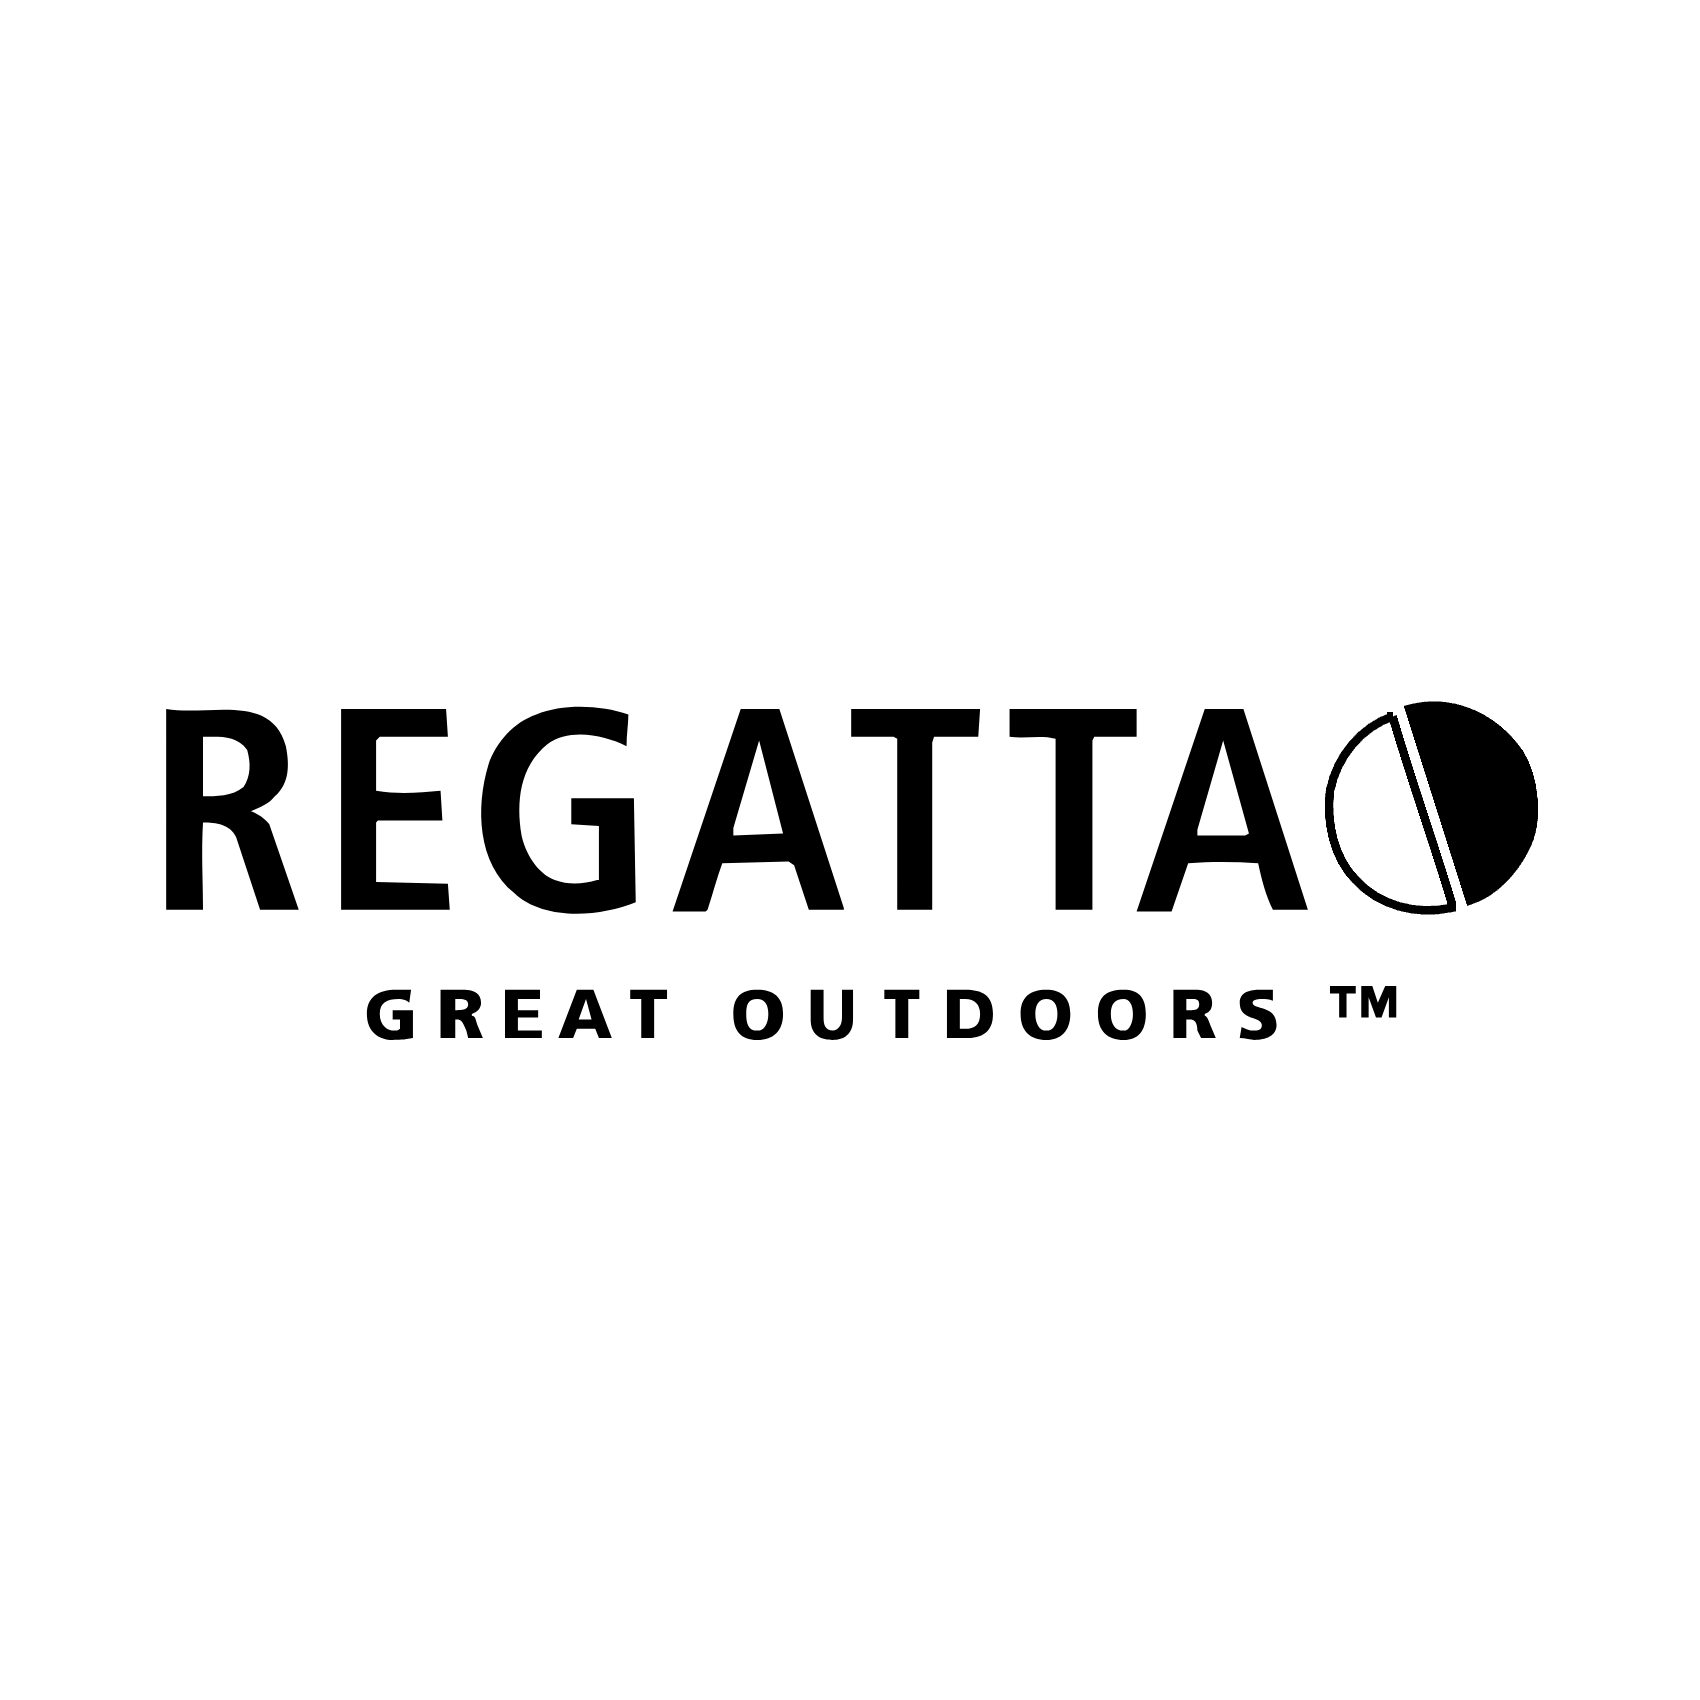 Download Regatta great outdoors Logo PNG and Vector (PDF, SVG, Ai, EPS ...